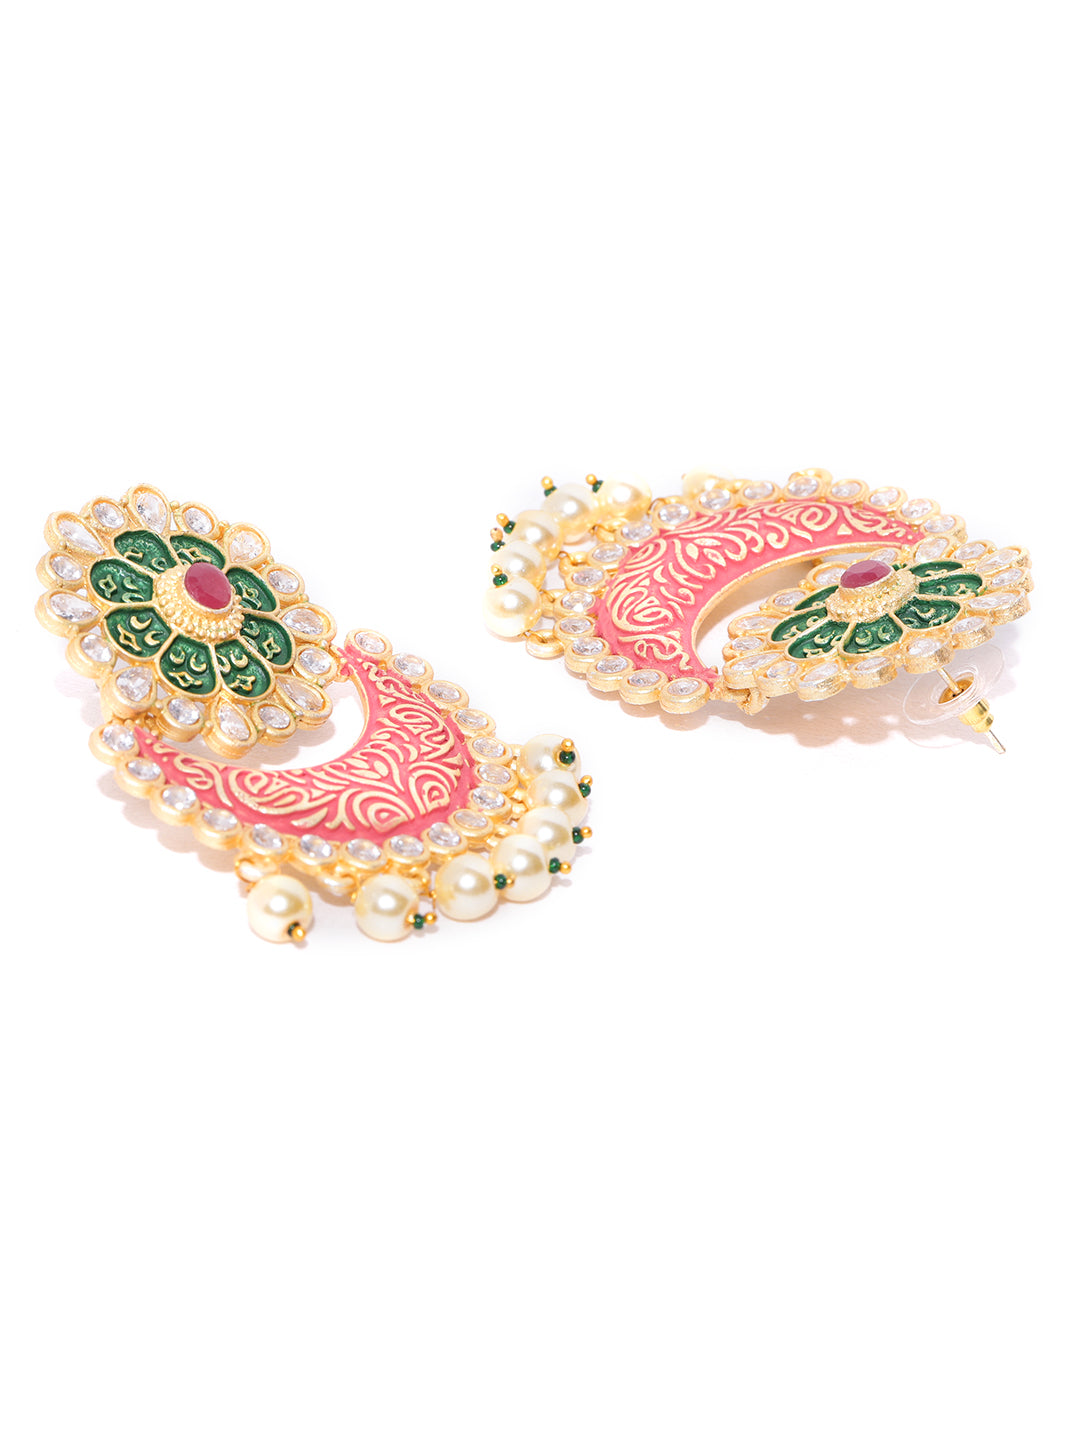 Gold-Plated Stones Studded Floral Patterned Drop Earrings with Meenakari work in Red And Green Color